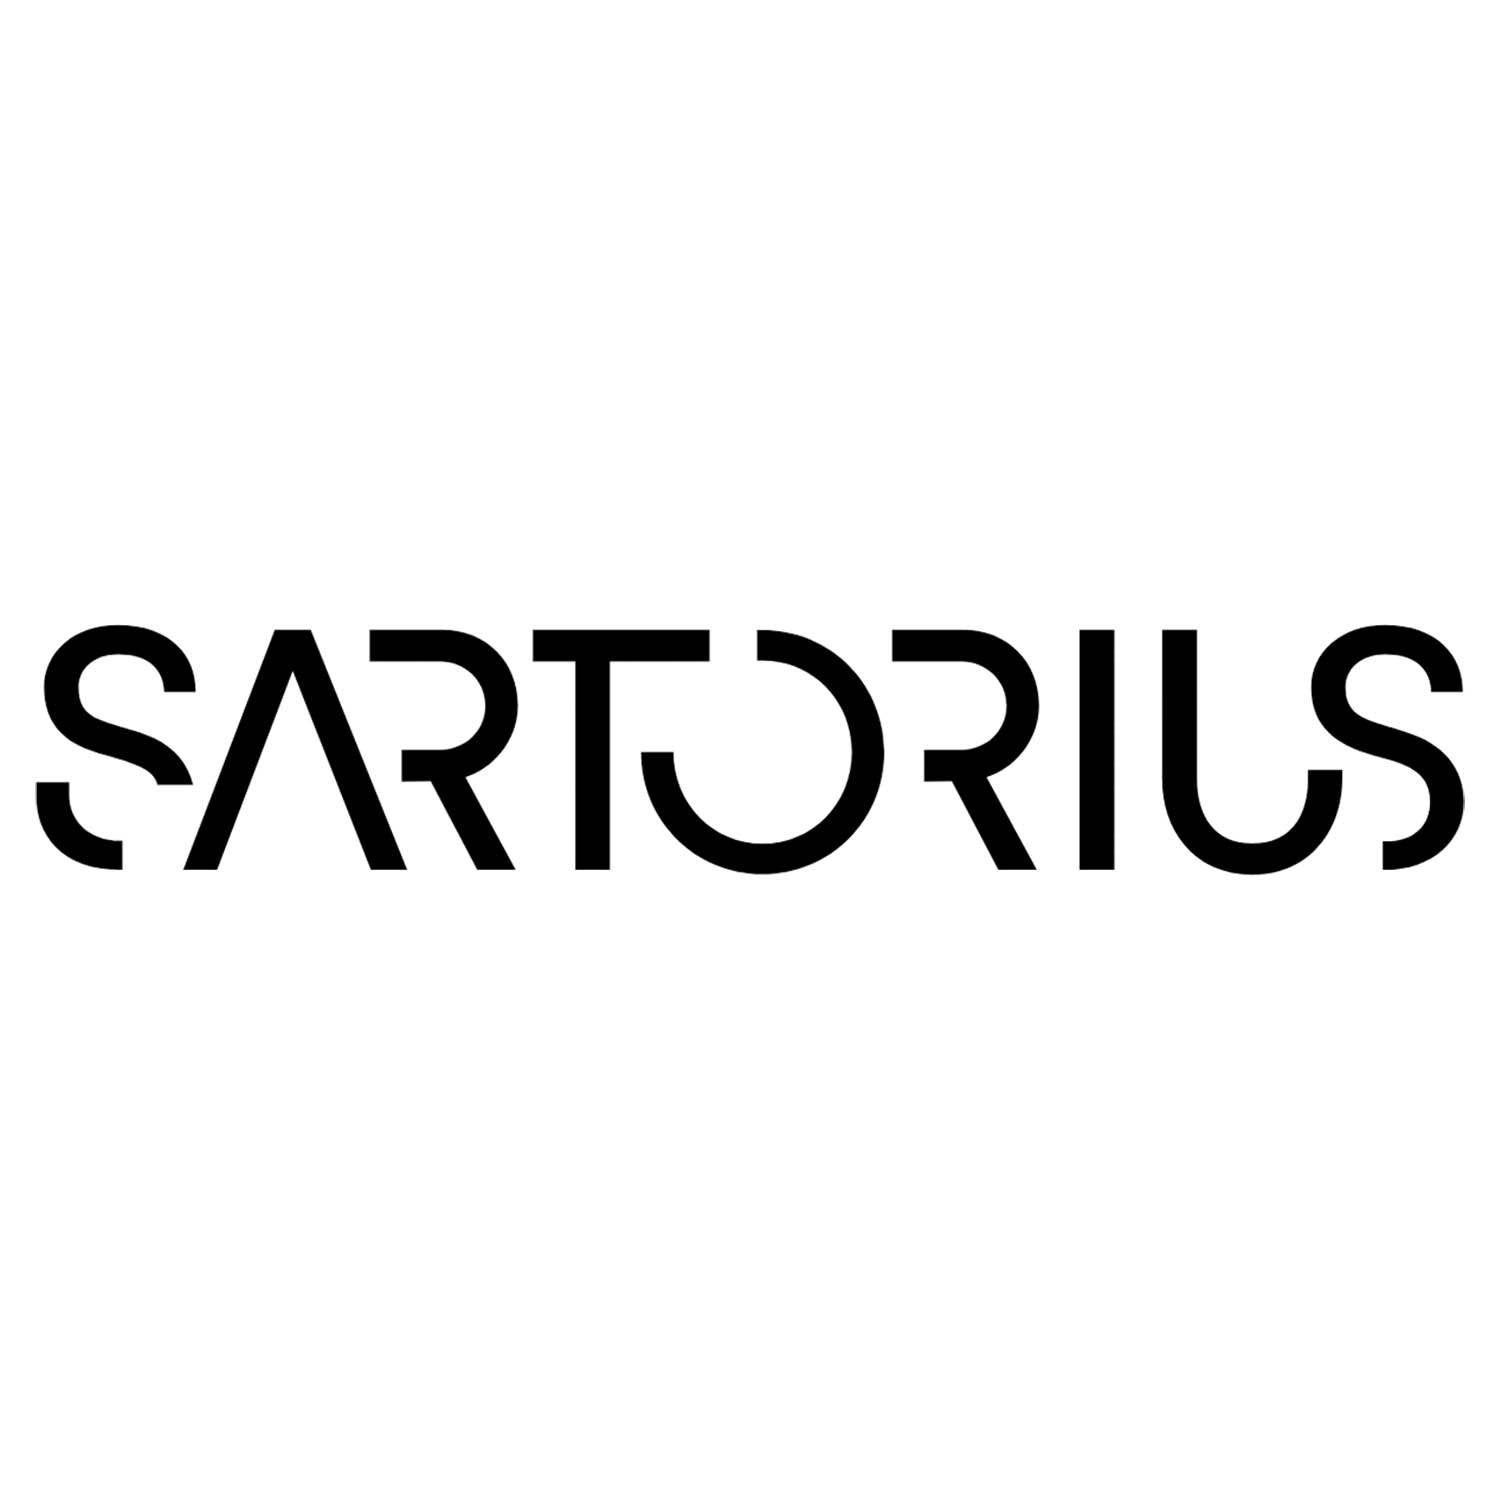 Sartorius FT-2-314-290580, Technical Papers, Creped/ Grade 6  S/N